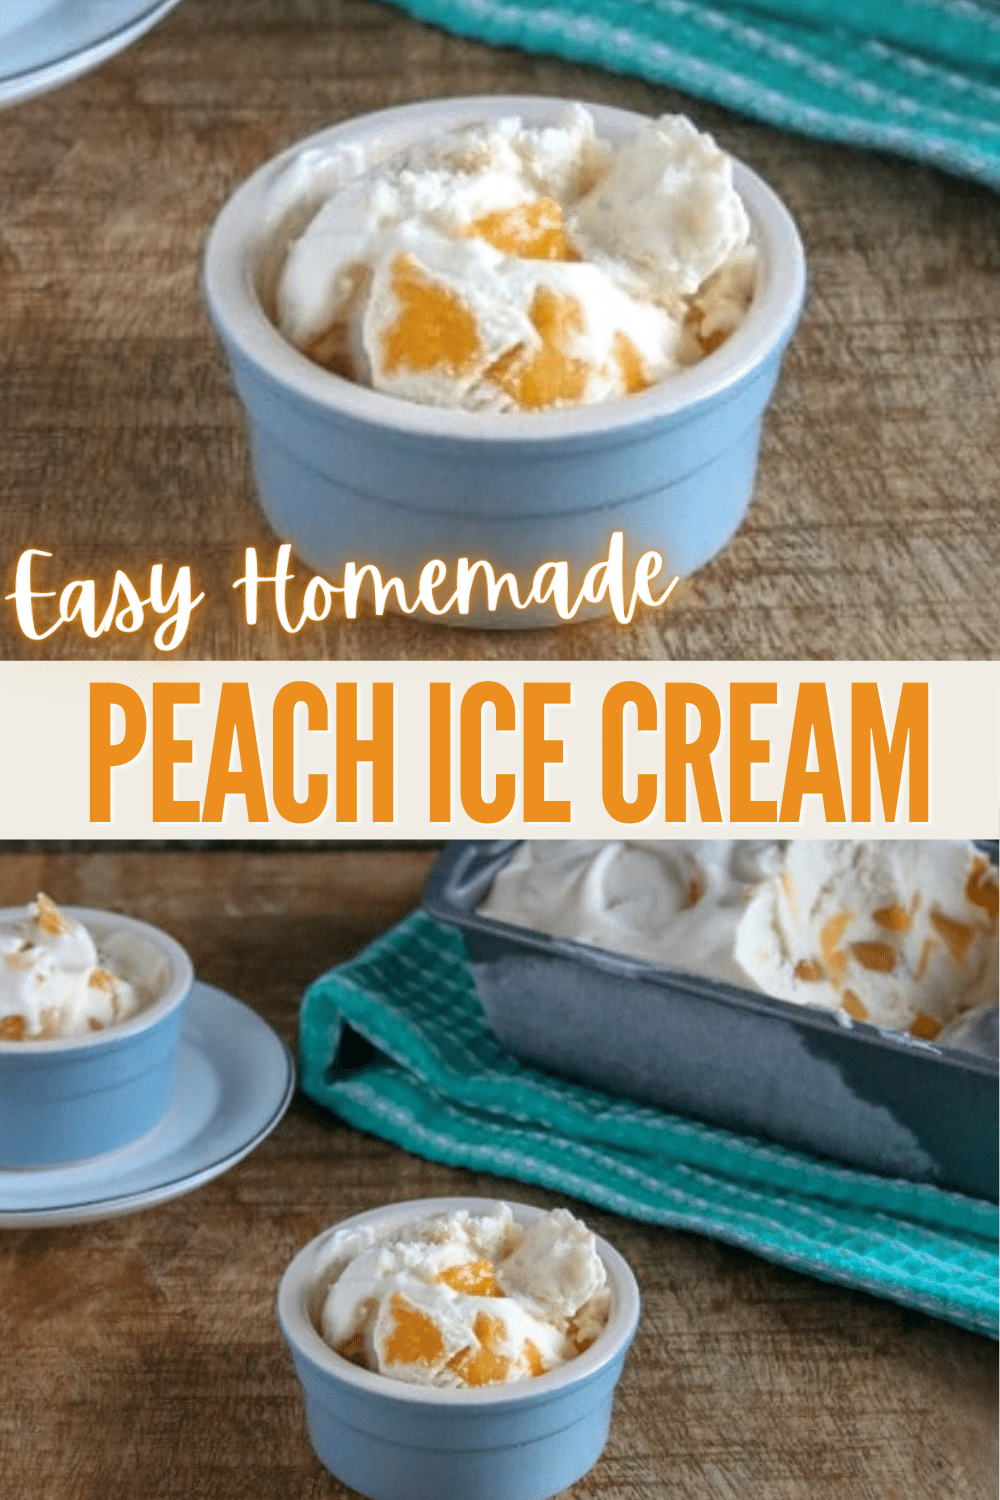 This Easy Peach Ice Cream is the perfect dessert for summer. It's cold and refreshing, creamy and delicious, and super easy to make! #peachicecream #peach #icecream #homemade via @wondermomwannab